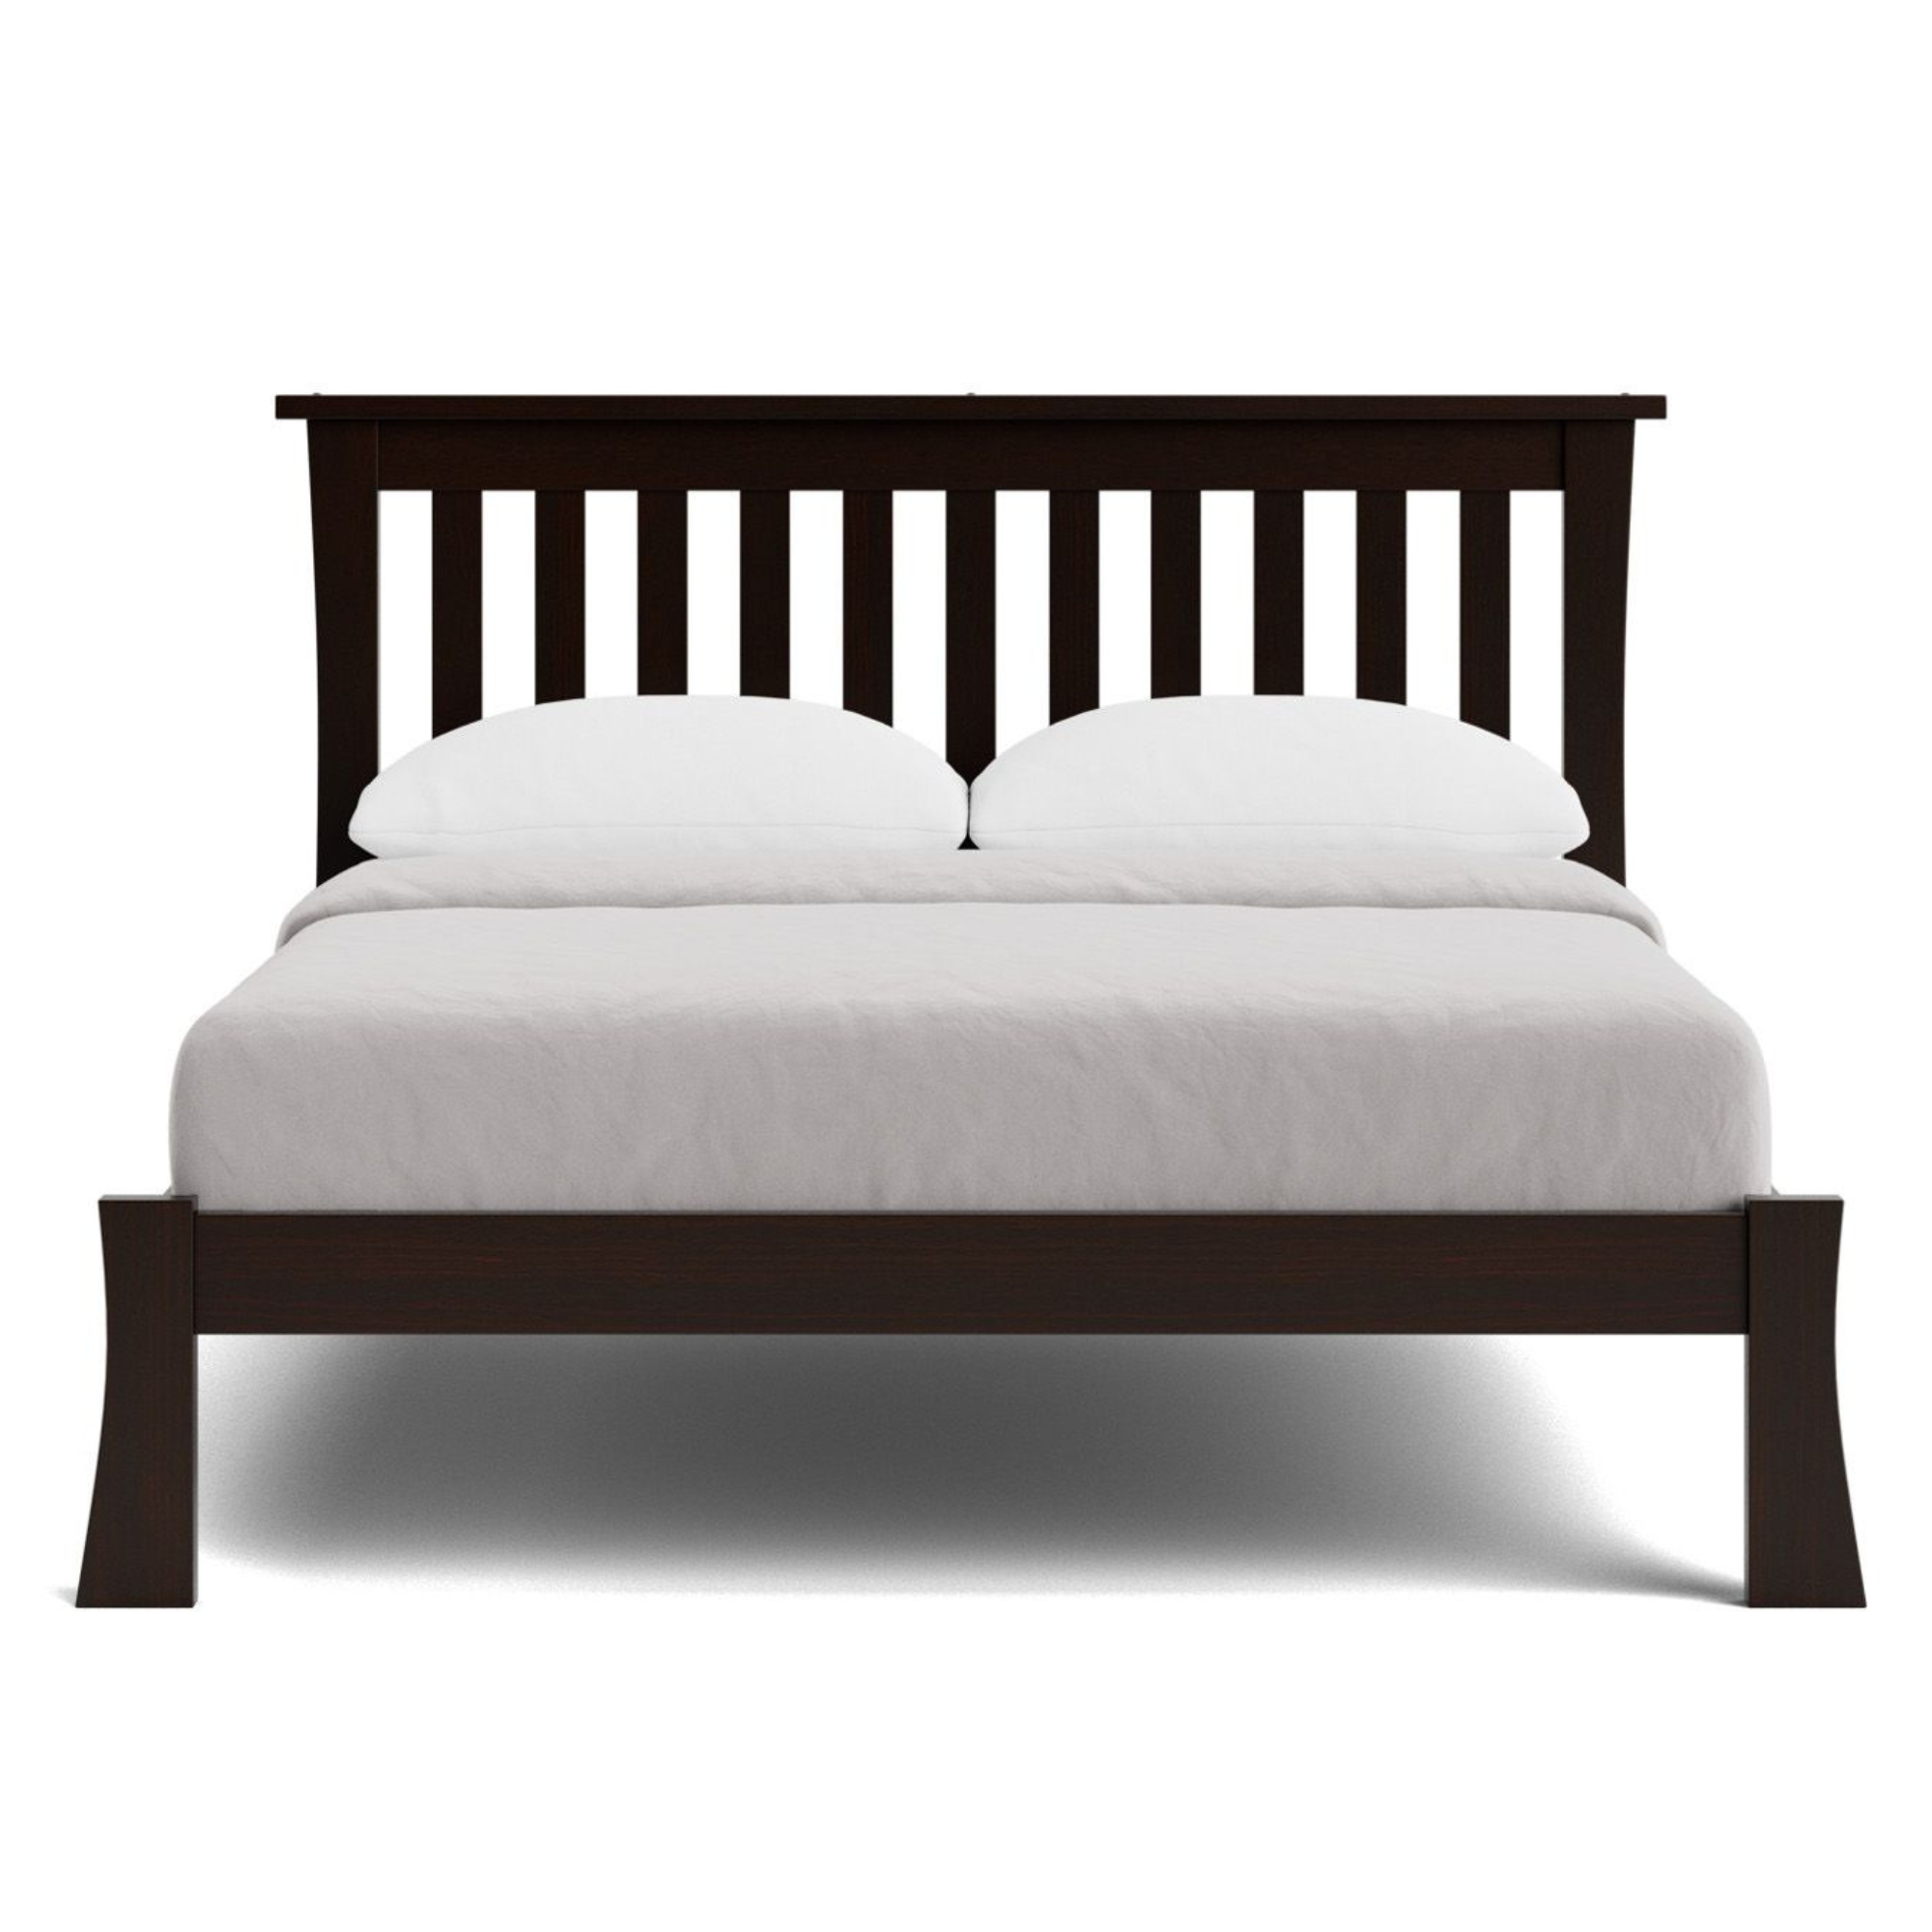 AMBROSE SLAT BED WITH LOW FOOT | ALL SIZES | NZ MADE BEDROOM FURNITURE